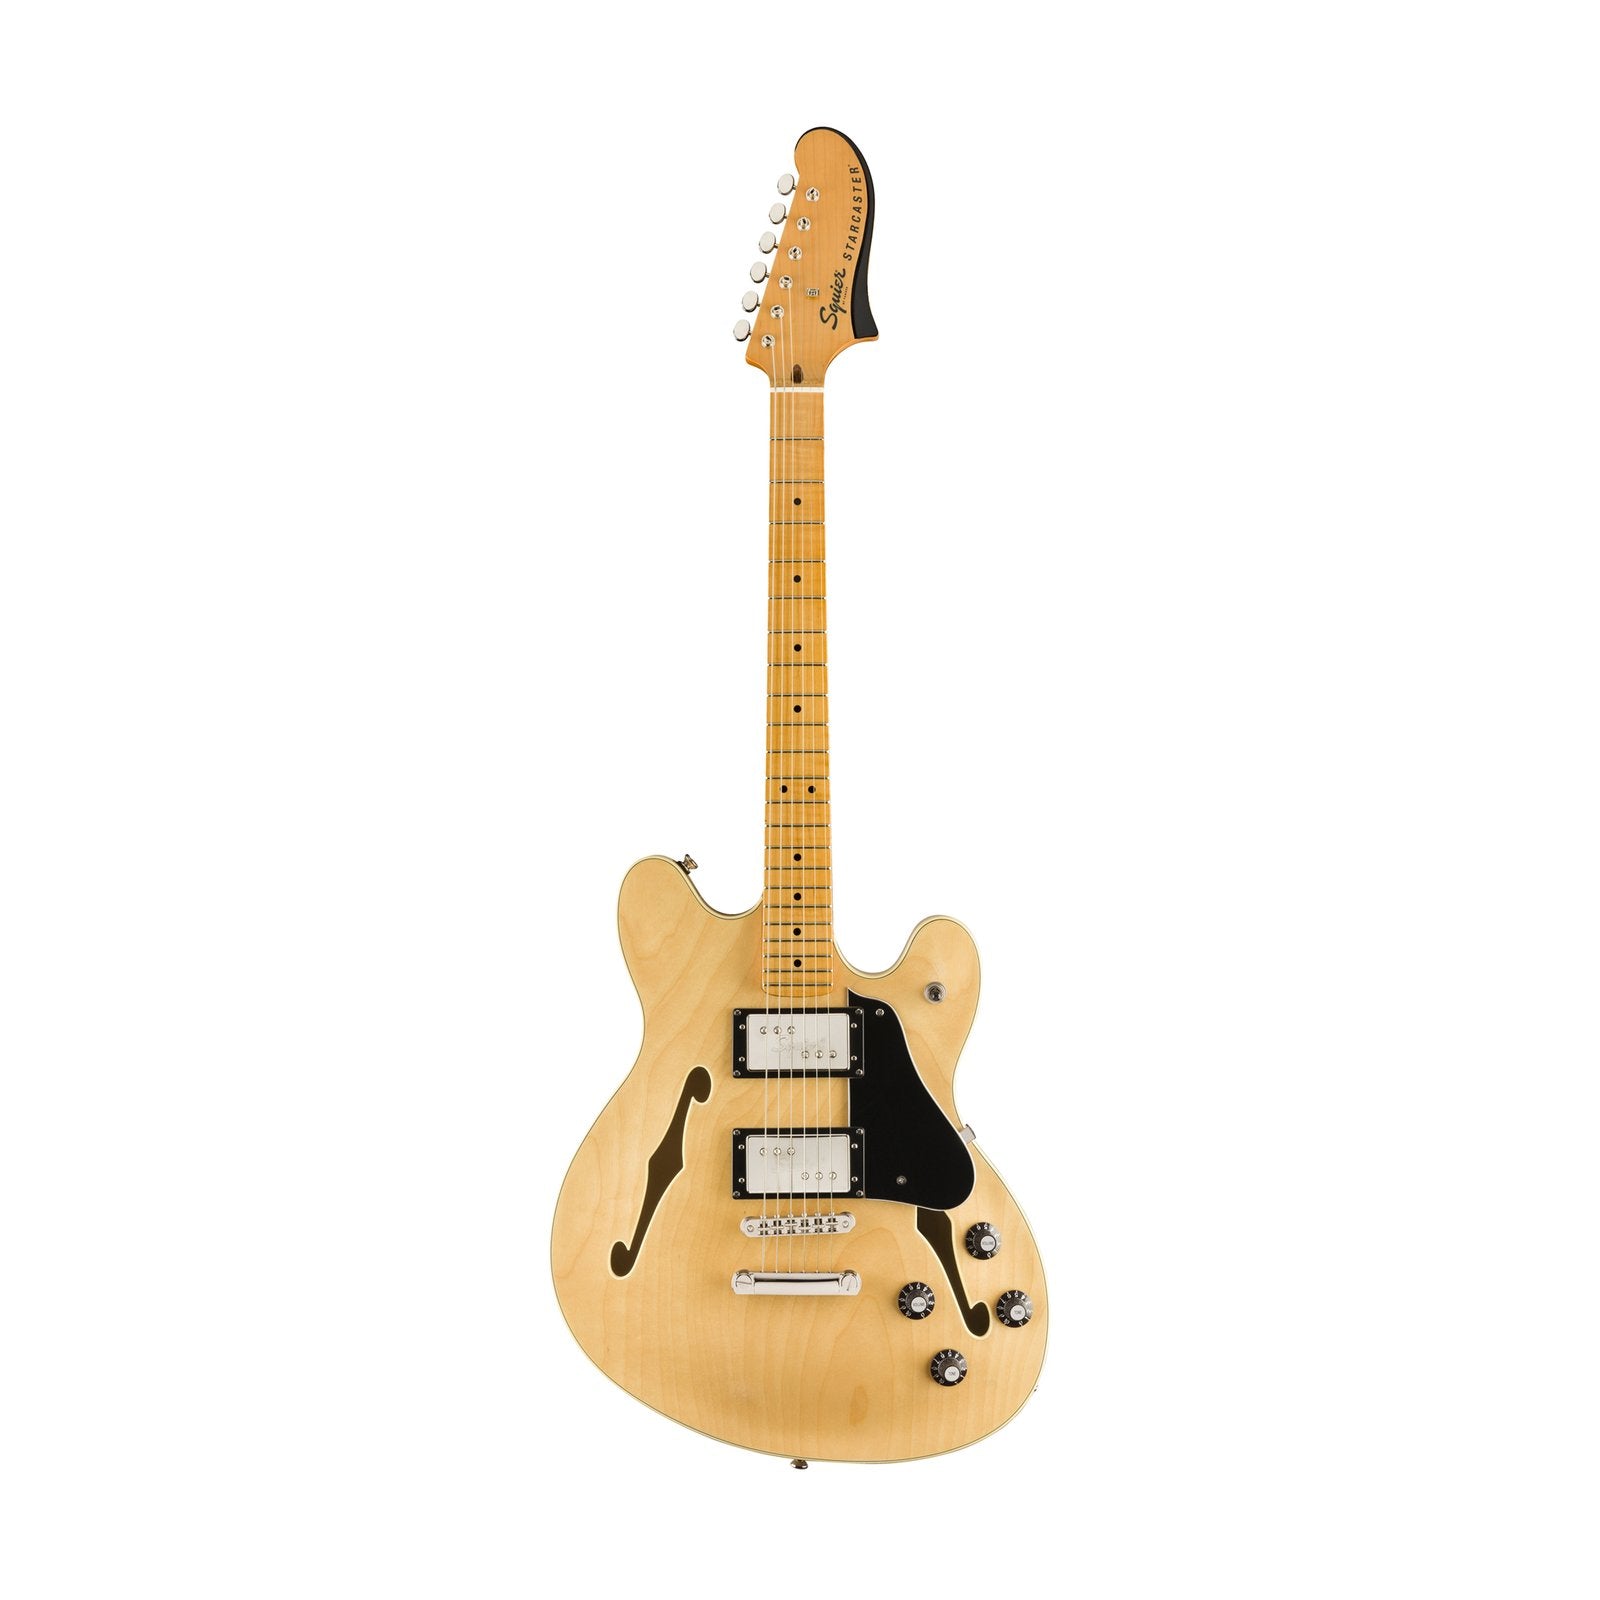 SQUIER CLASSIC VIBE STARCASTER ELECTRIC GUITAR, MAPLE FB, NATURAL, SQUIER BY FENDER, ELECTRIC GUITAR, squier-by-fender-electric-guitar-037-4590-521, ZOSO MUSIC SDN BHD